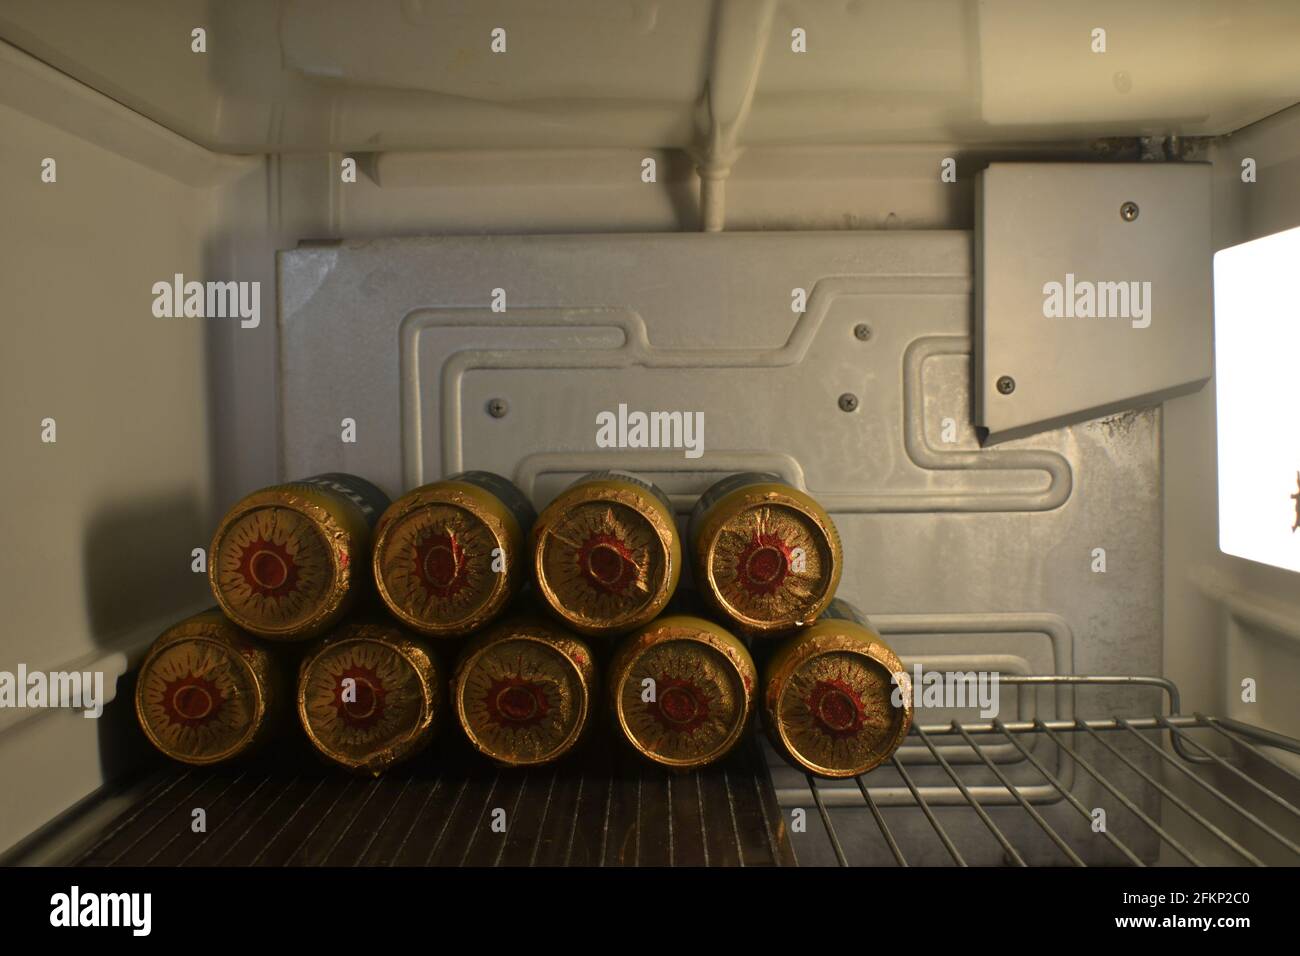 Beers in the refrigerator, open vintage refrigerator showing the inside with internal light and shelf with cans of cold beers Stock Photo